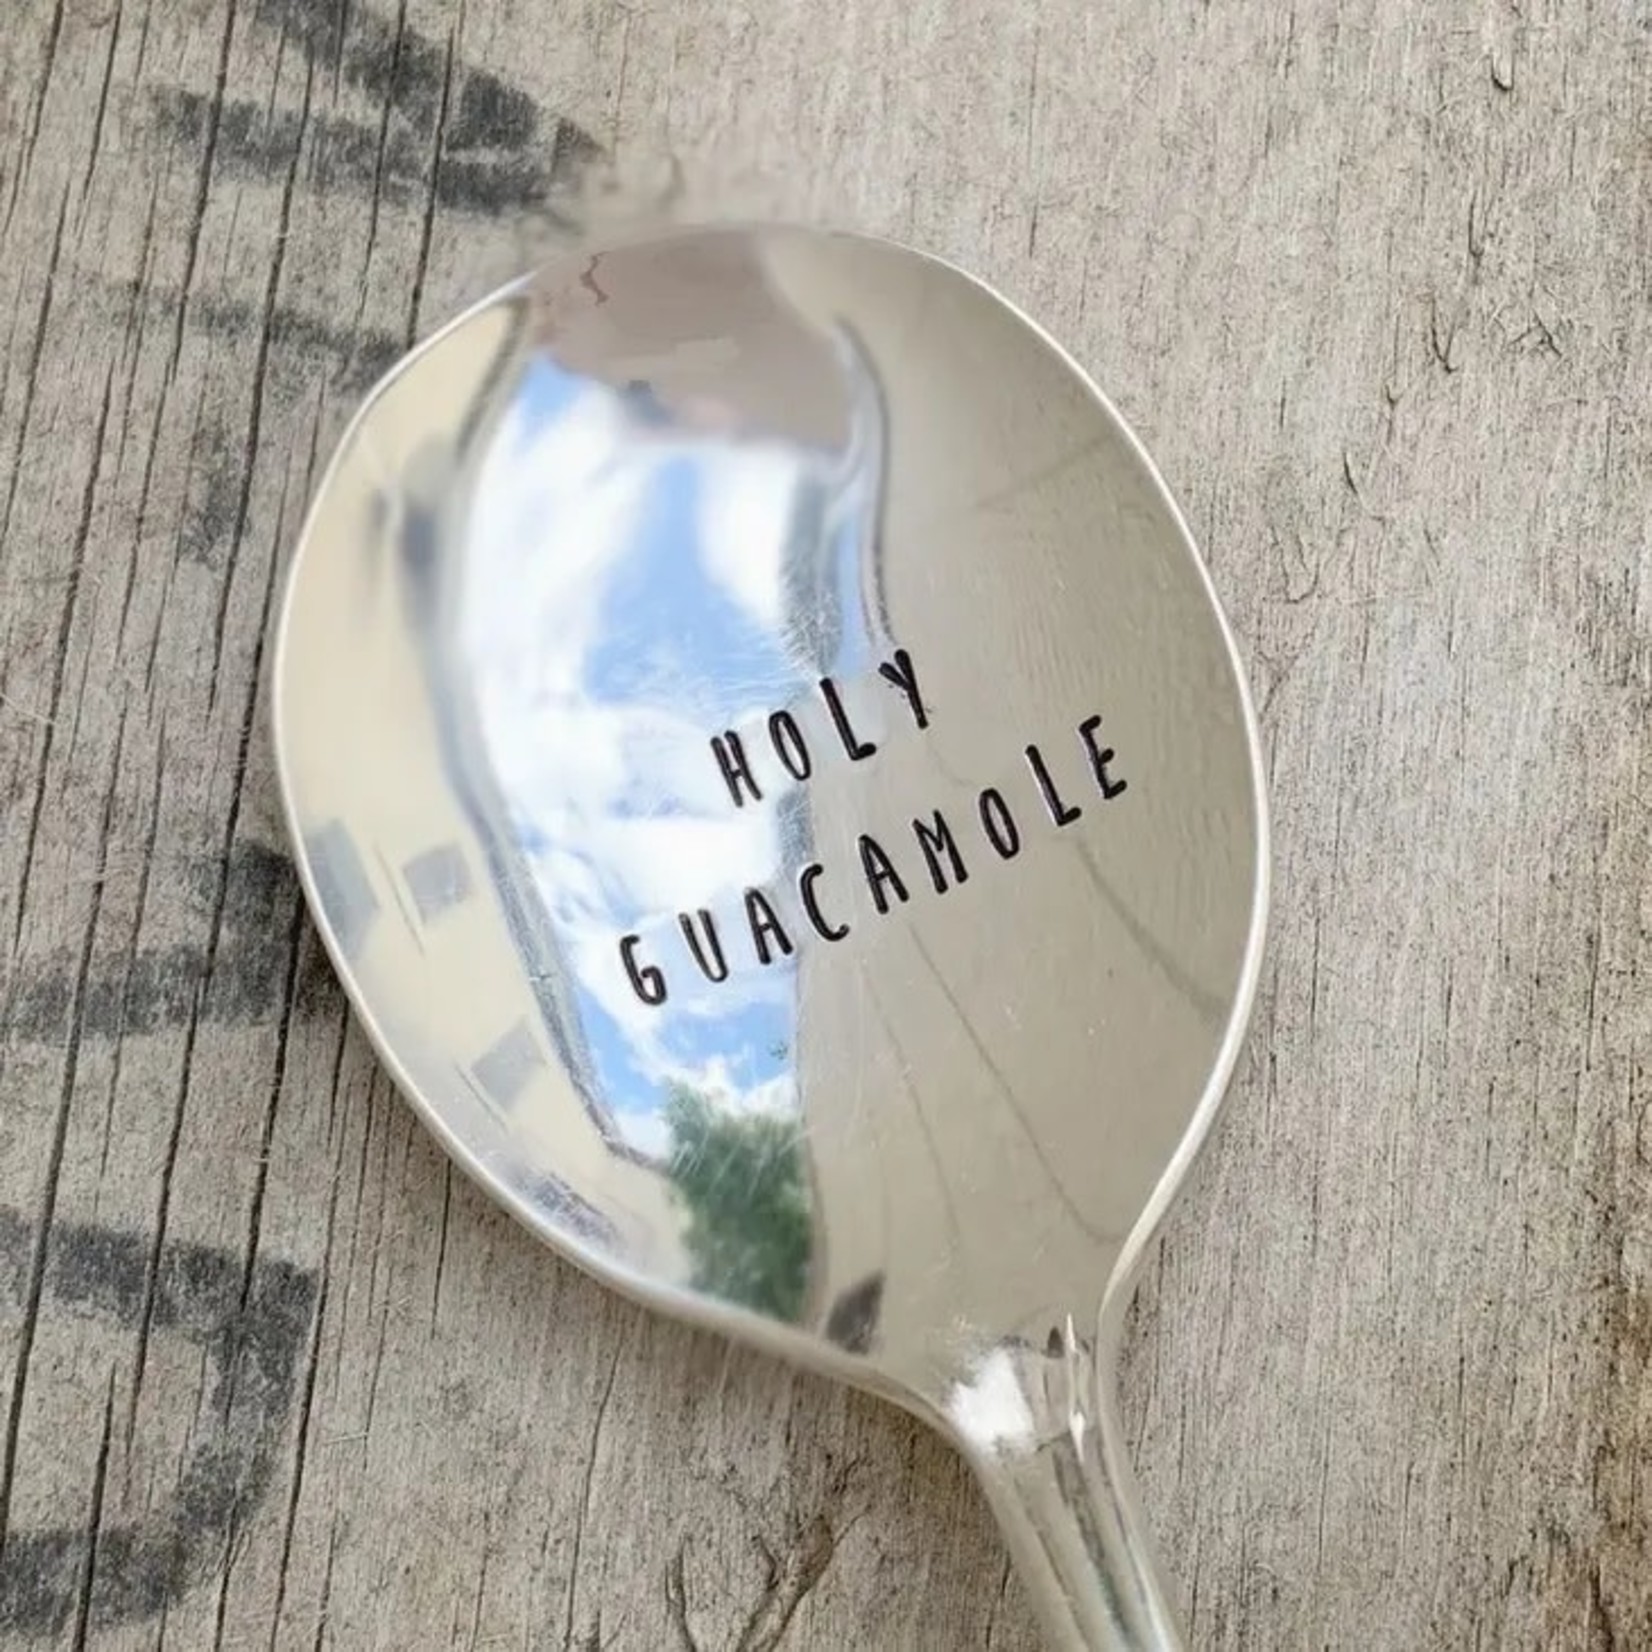 Holy Guacamole Round Spoon